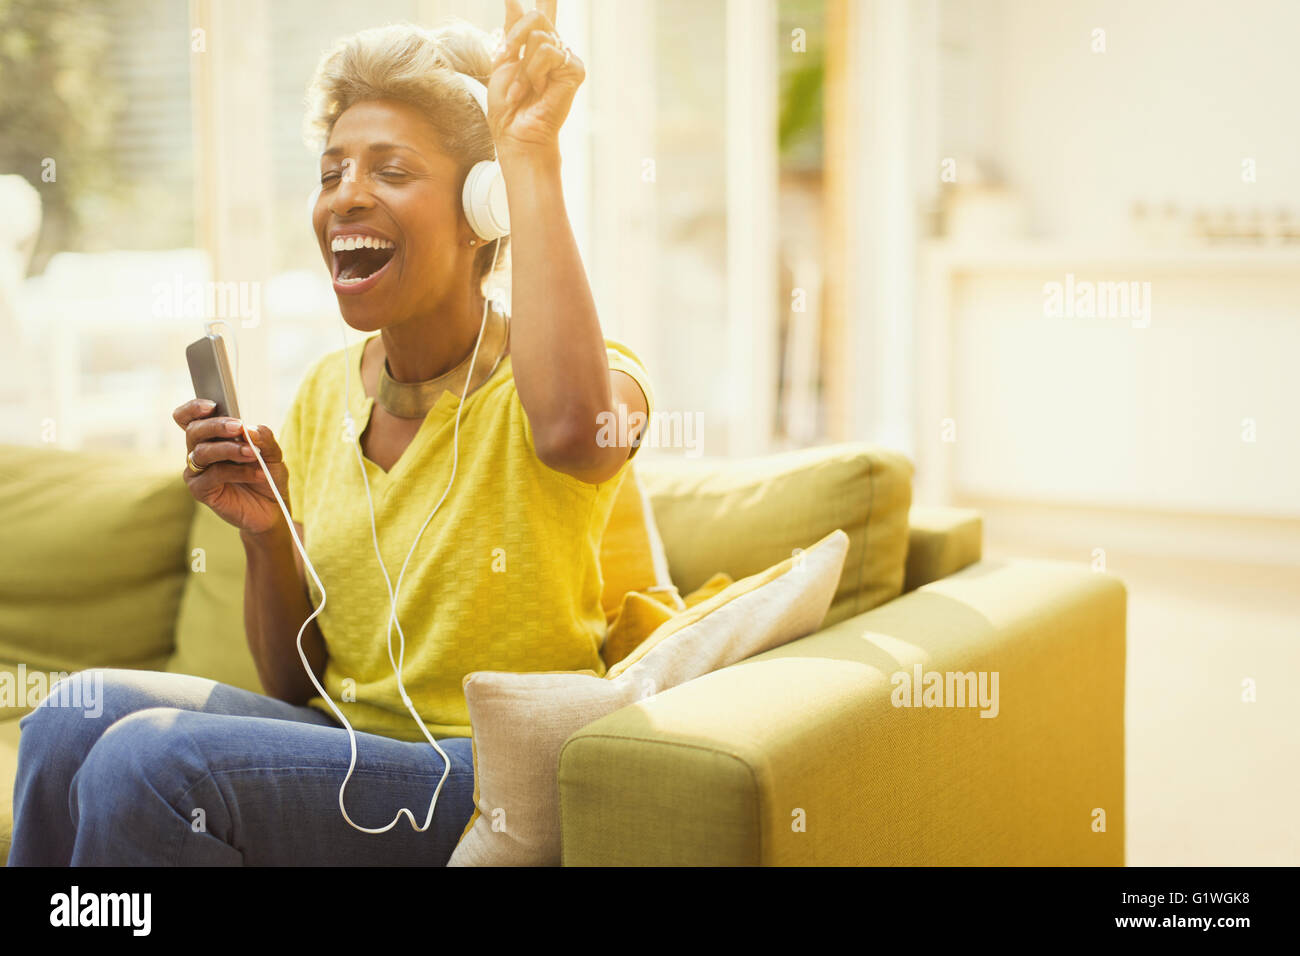 Playful mature woman listening to headphones with MP3 player in living room Stock Photo